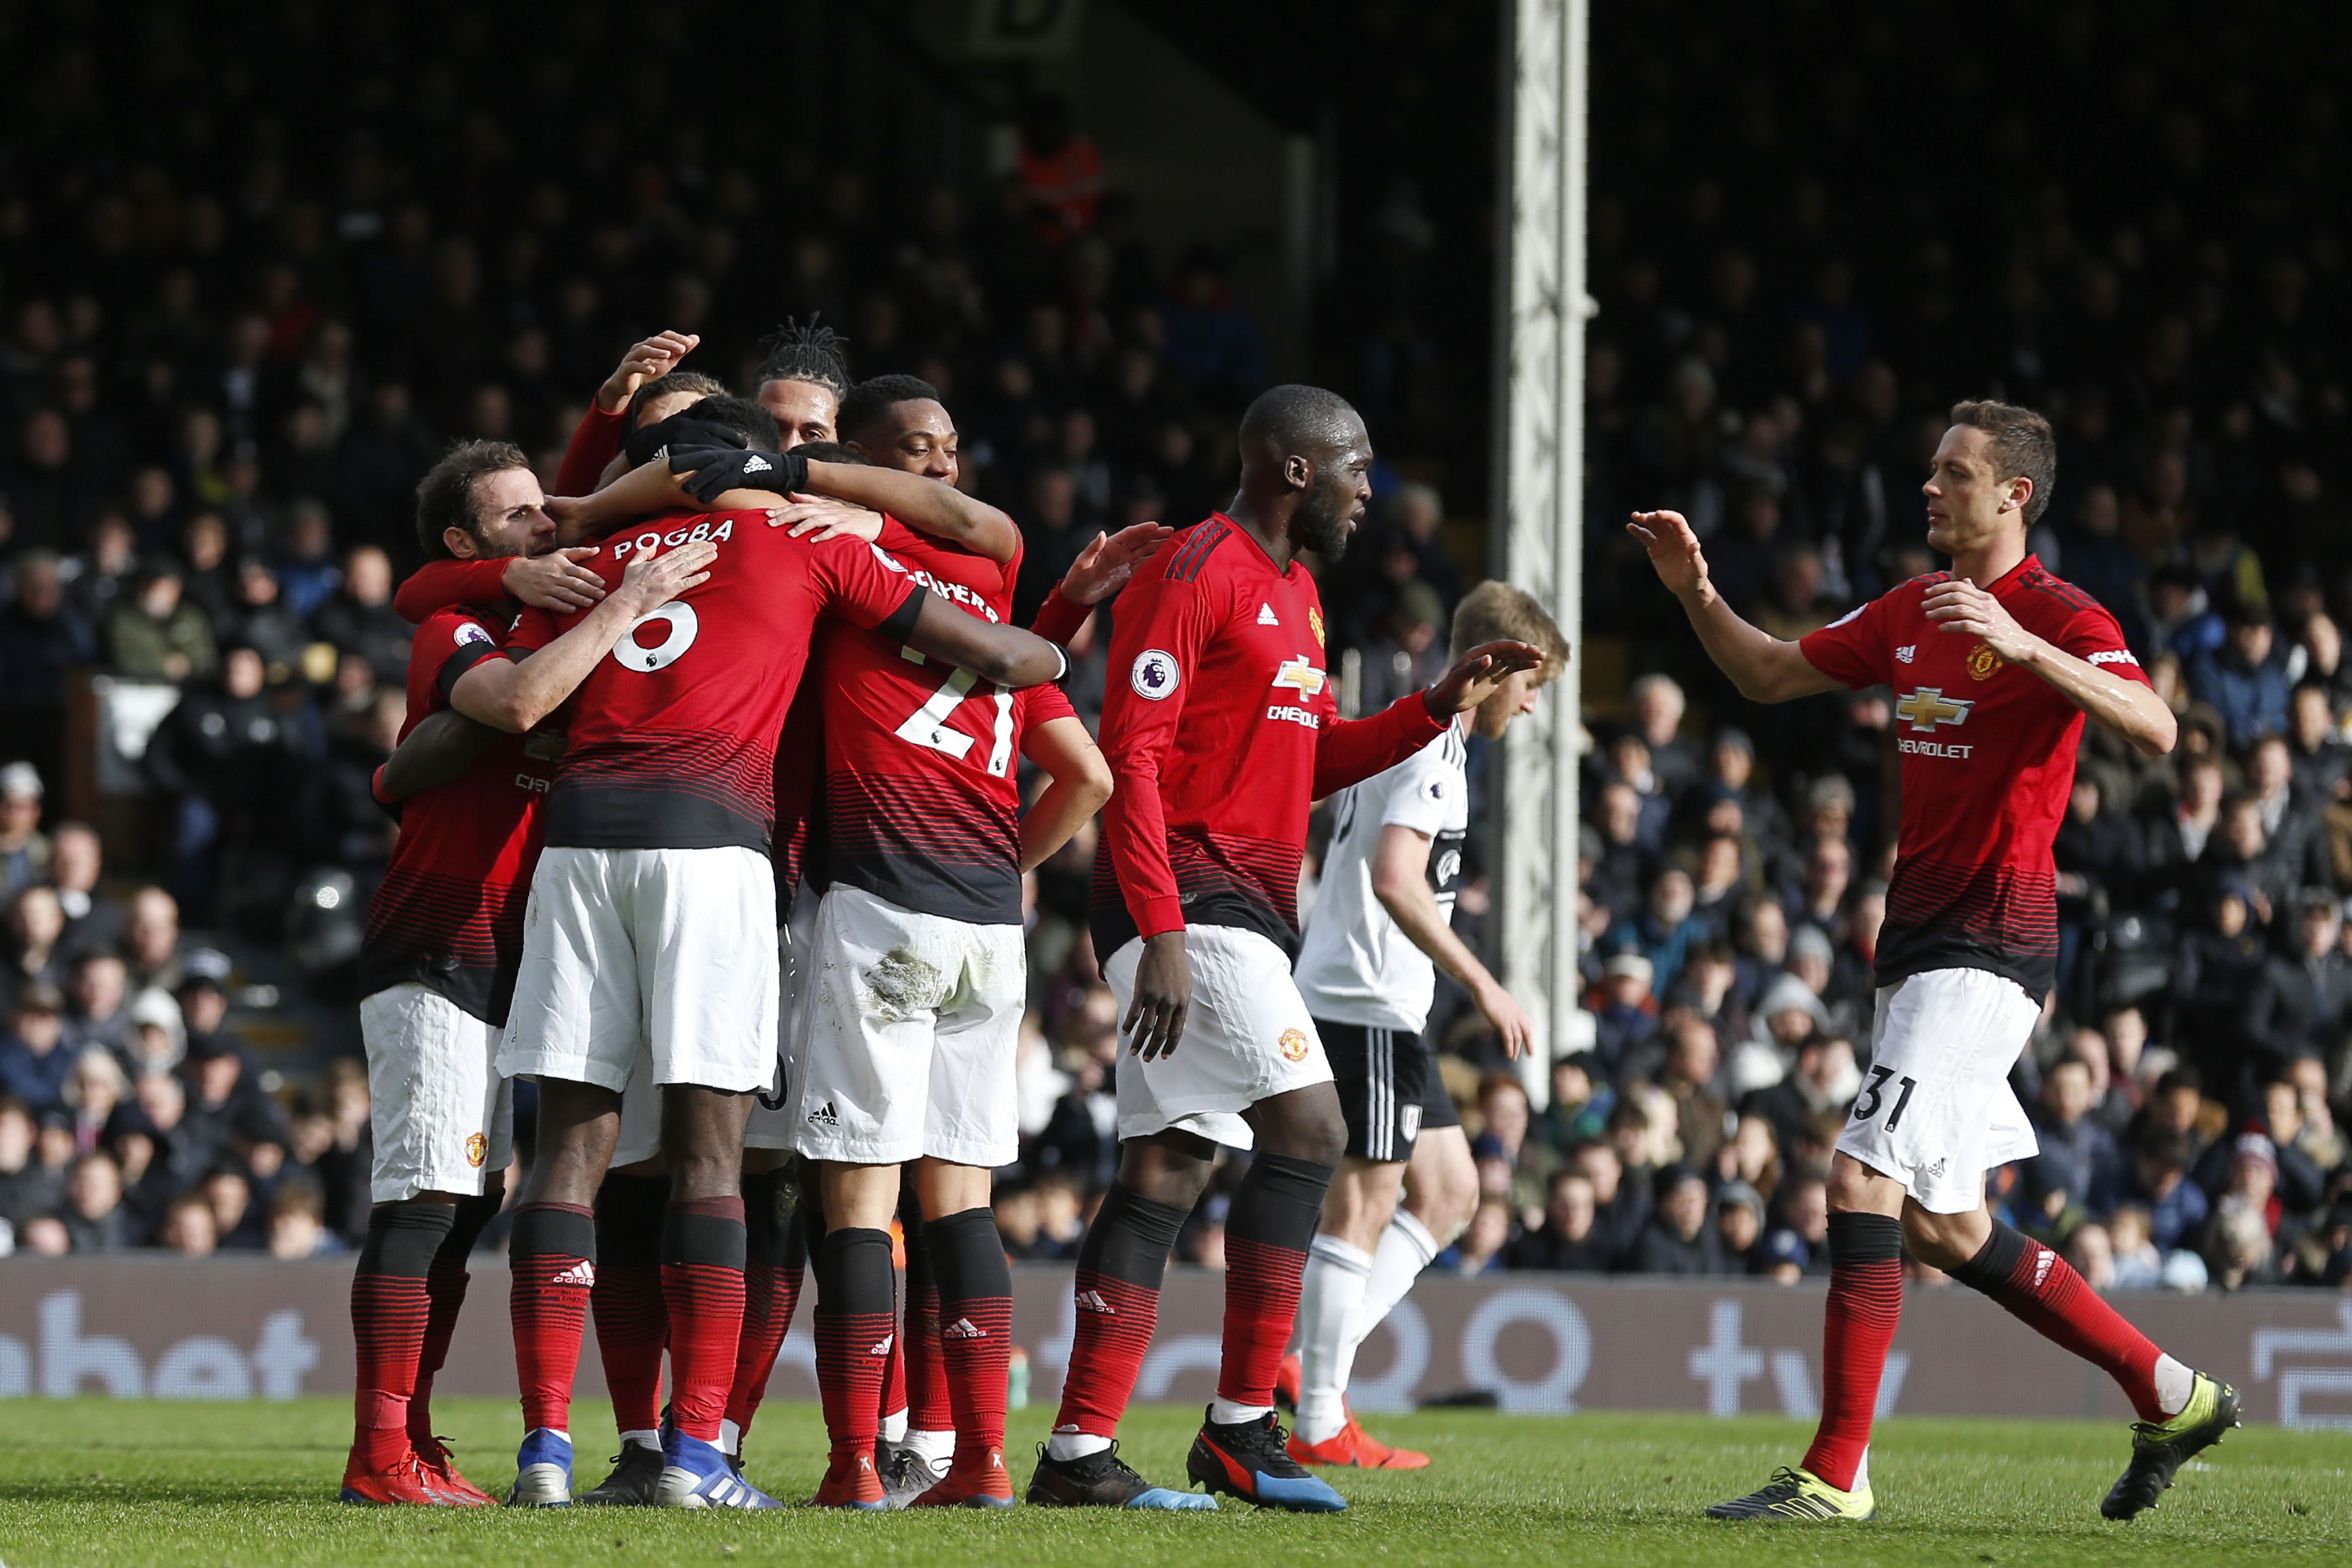 Manchester United's French midfielder Paul Pogba (2nd L) celebrates with teammates after scoring their third goal from the penalty spot during the English Premier League football match between Fulham and Manchester United at Craven Cottage in London on February 9, 2019. (Photo by Ian KINGTON / AFP) / RESTRICTED TO EDITORIAL USE. No use with unauthorized audio, video, data, fixture lists, club/league logos or 'live' services. Online in-match use limited to 120 images. An additional 40 images may be used in extra time. No video emulation. Social media in-match use limited to 120 images. An additional 40 images may be used in extra time. No use in betting publications, games or single club/league/player publications. /         (Photo credit should read IAN KINGTON/AFP/Getty Images)